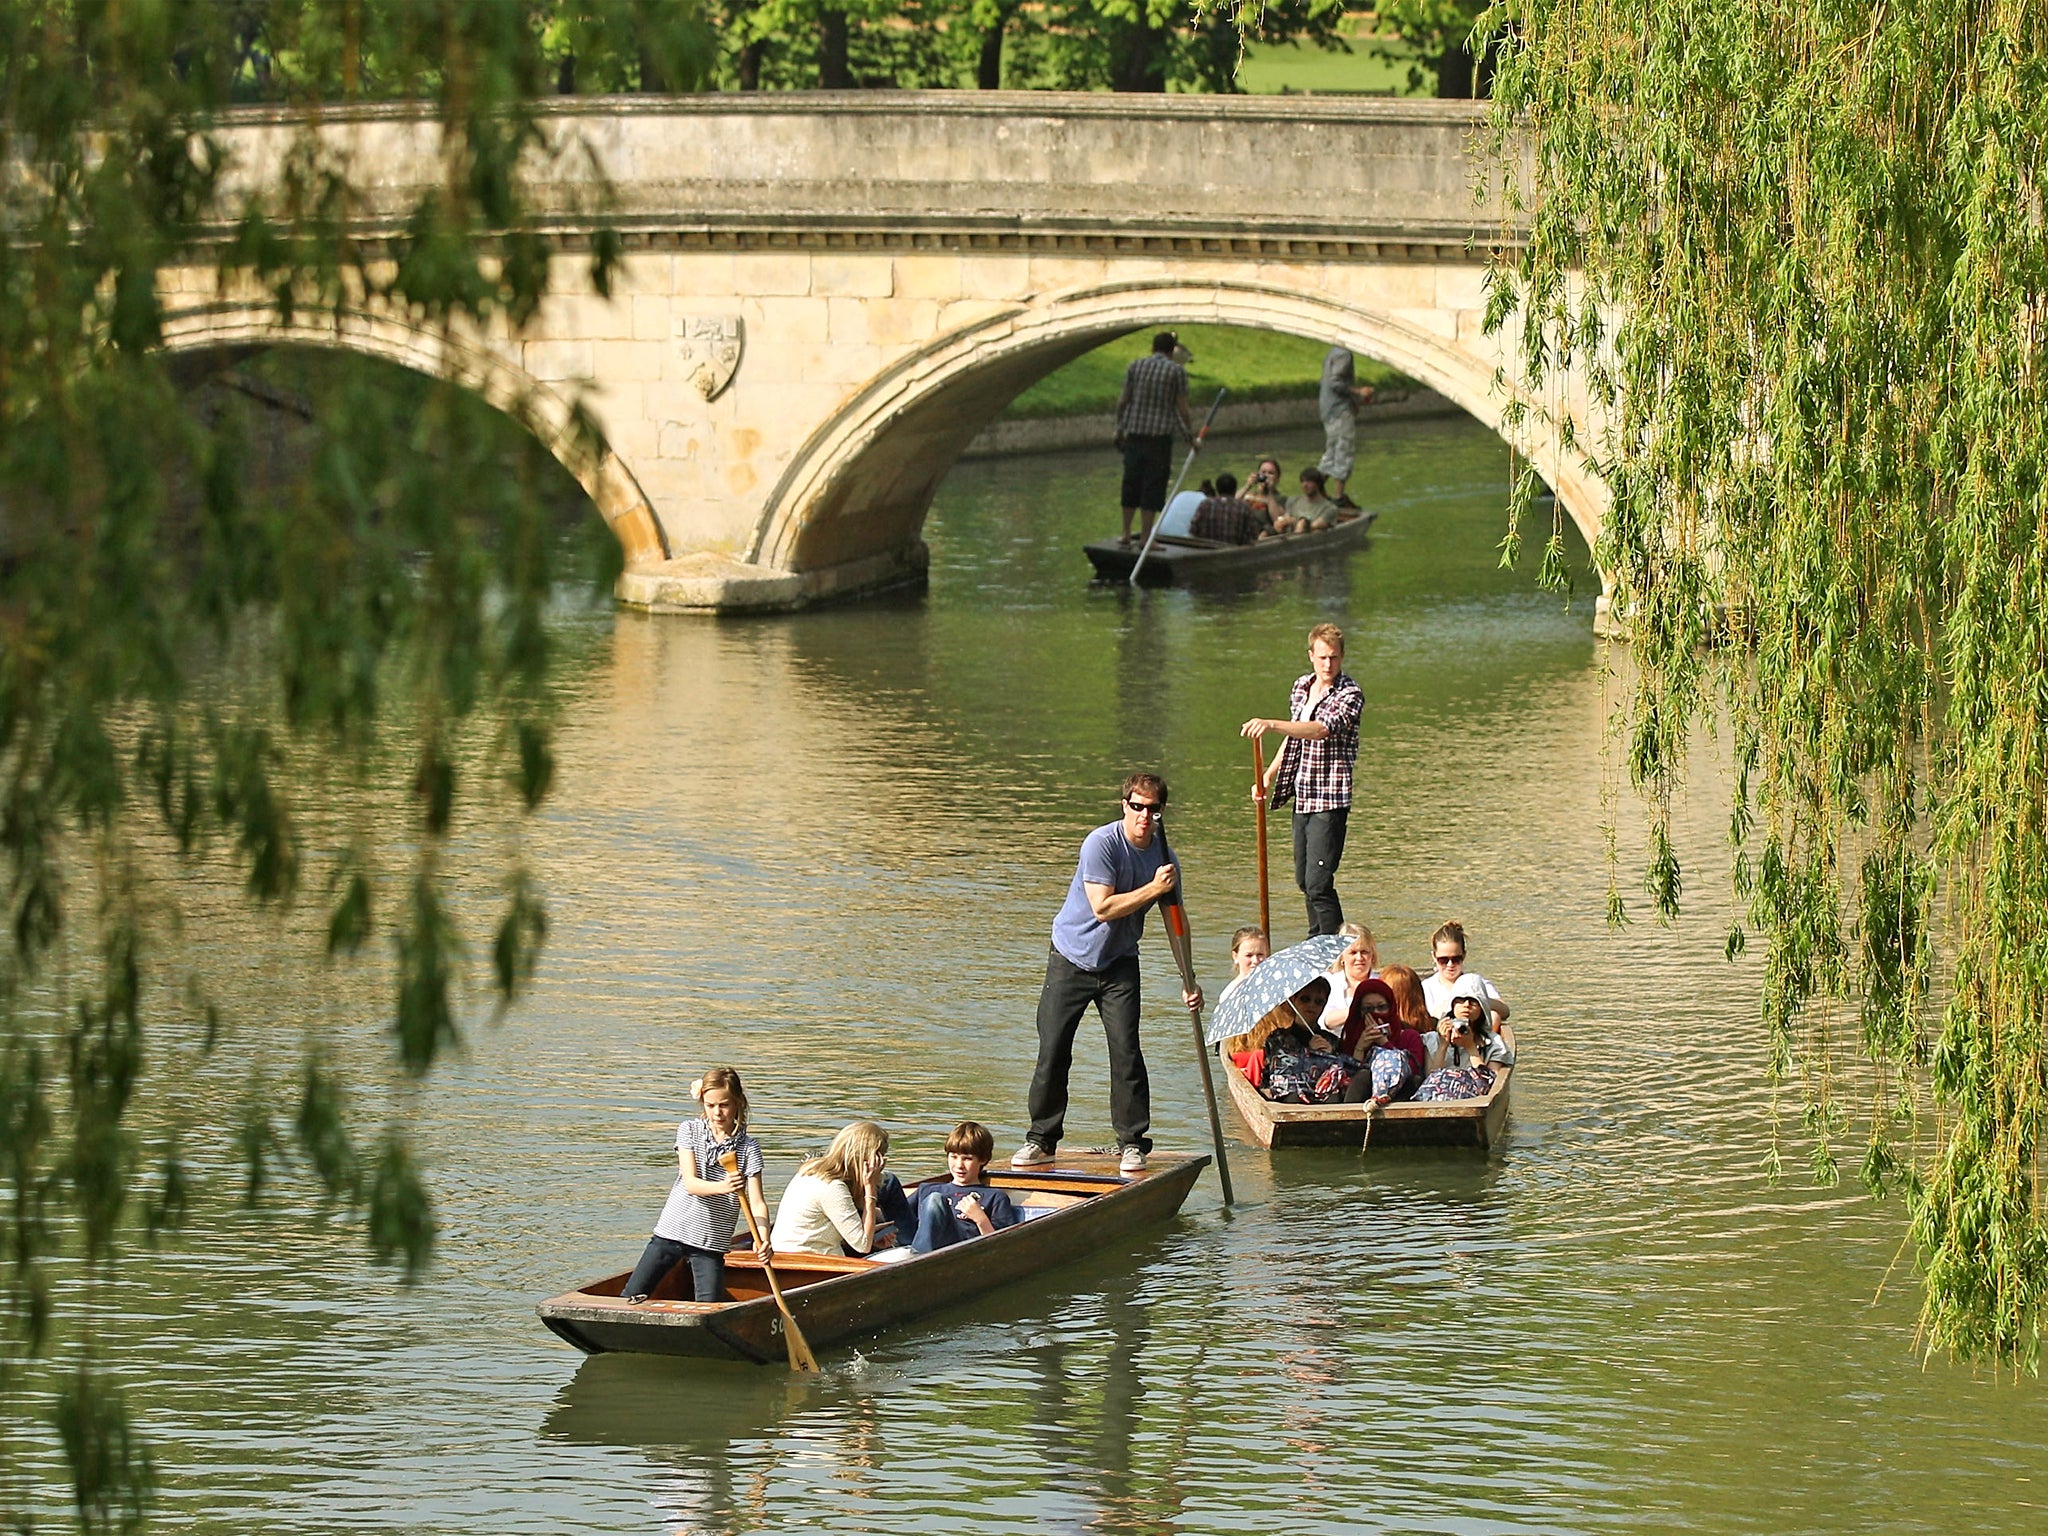 Members of the public punt along the river Cam in front of the colleges of Cambridge University